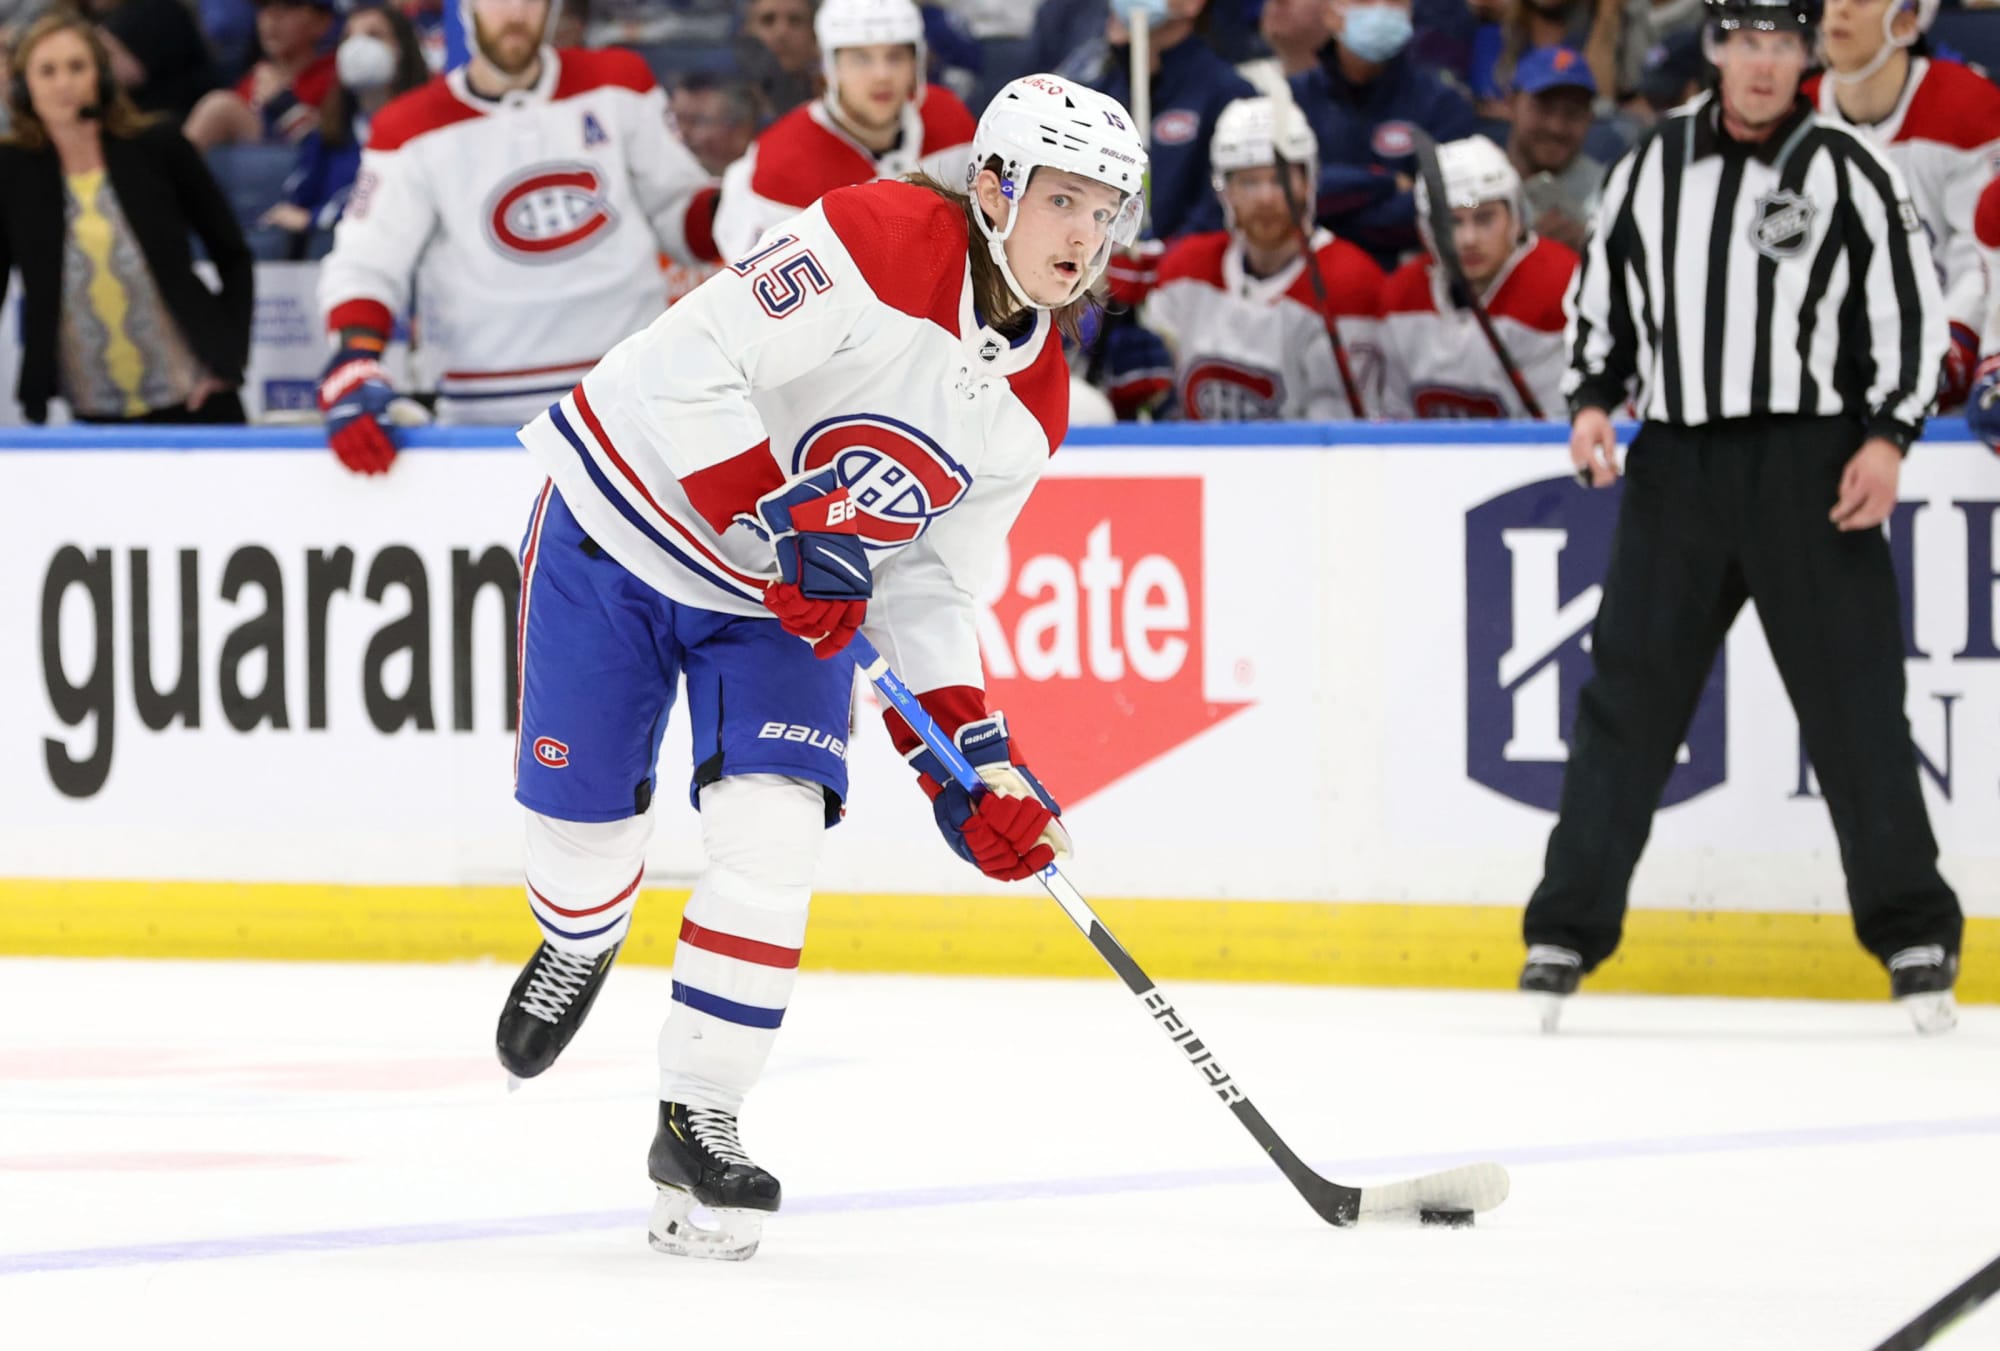 Montreal Canadiens: Rem Pitlick, Sami Niku Could Become UFAs if They Don’t Play More